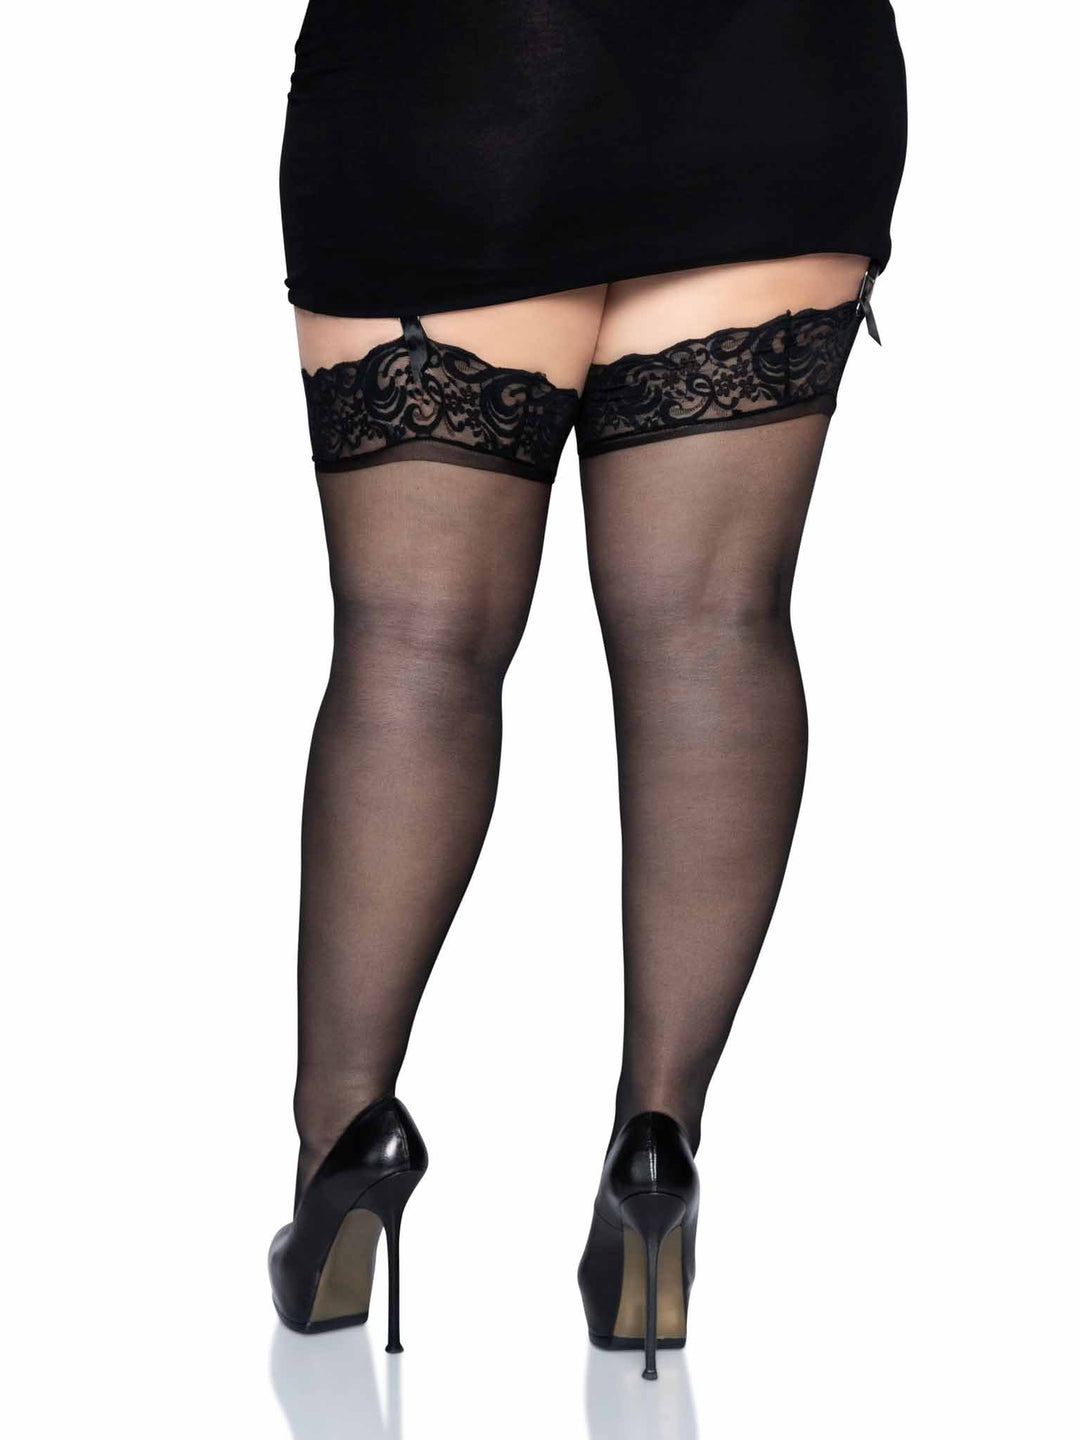 Nylon Plus Size Sheer Thigh Highs with Lace Top